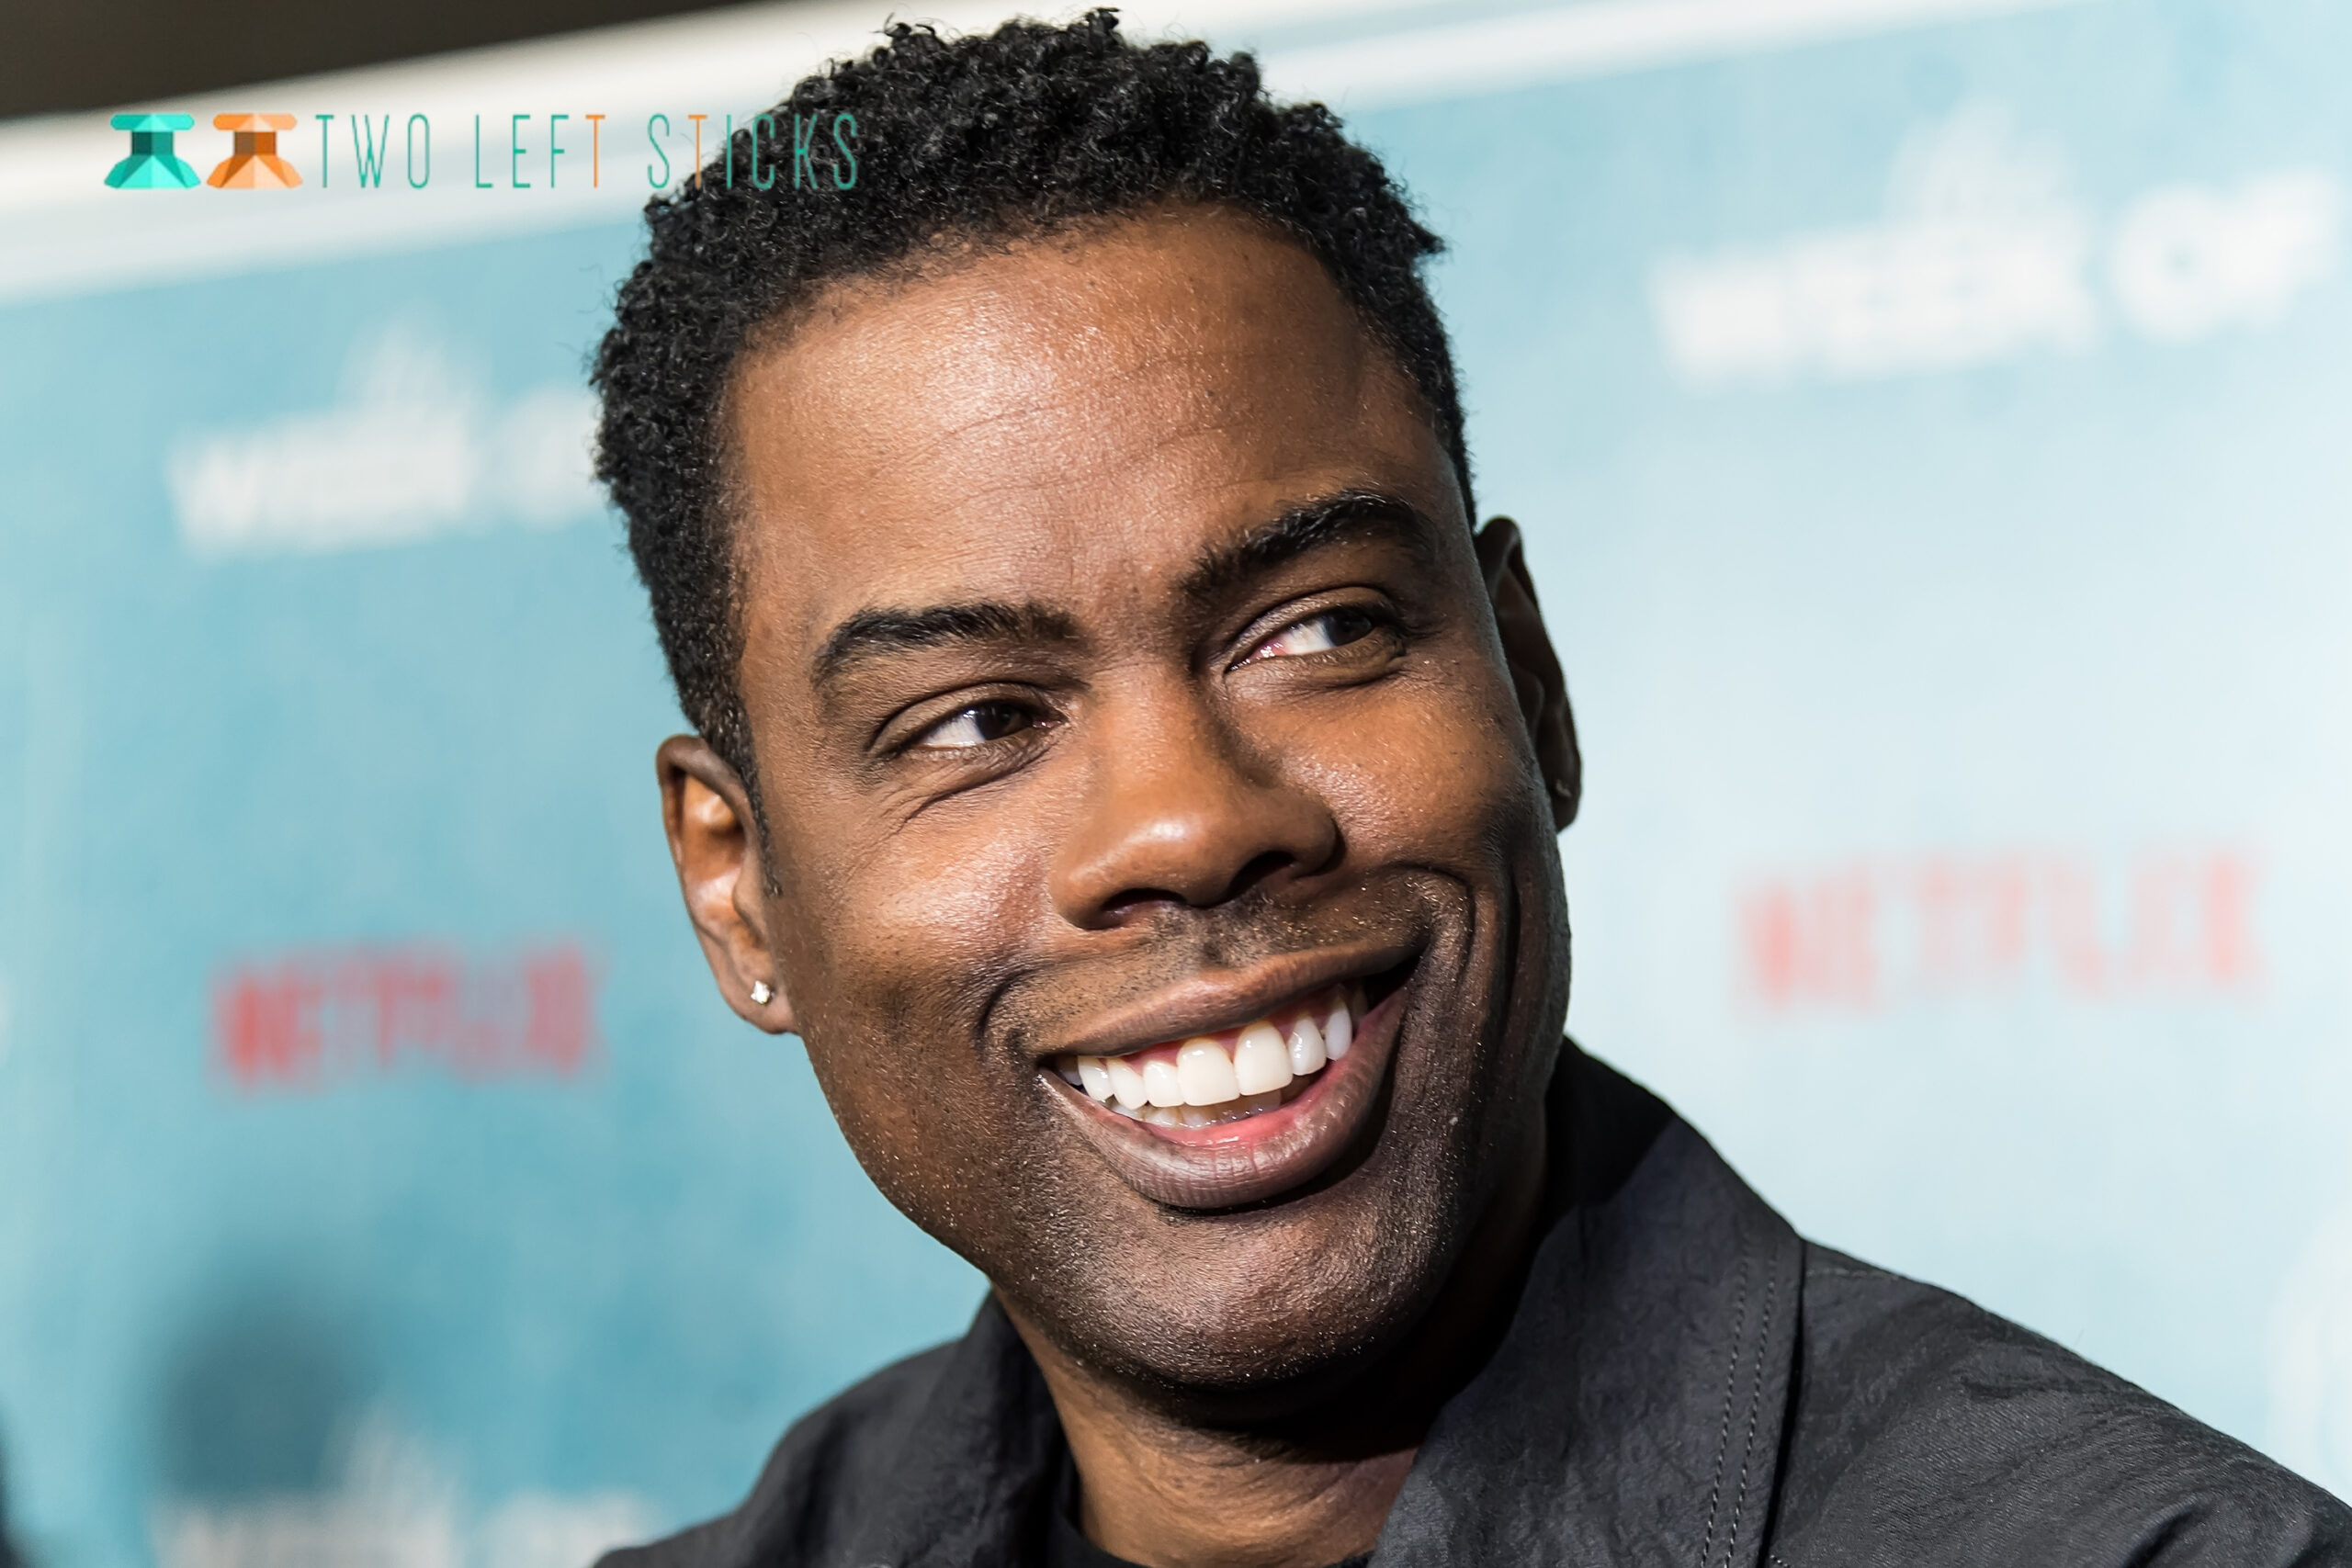 Chris Rock Net Worth In 2022, Chris Rock will have a Fortune!